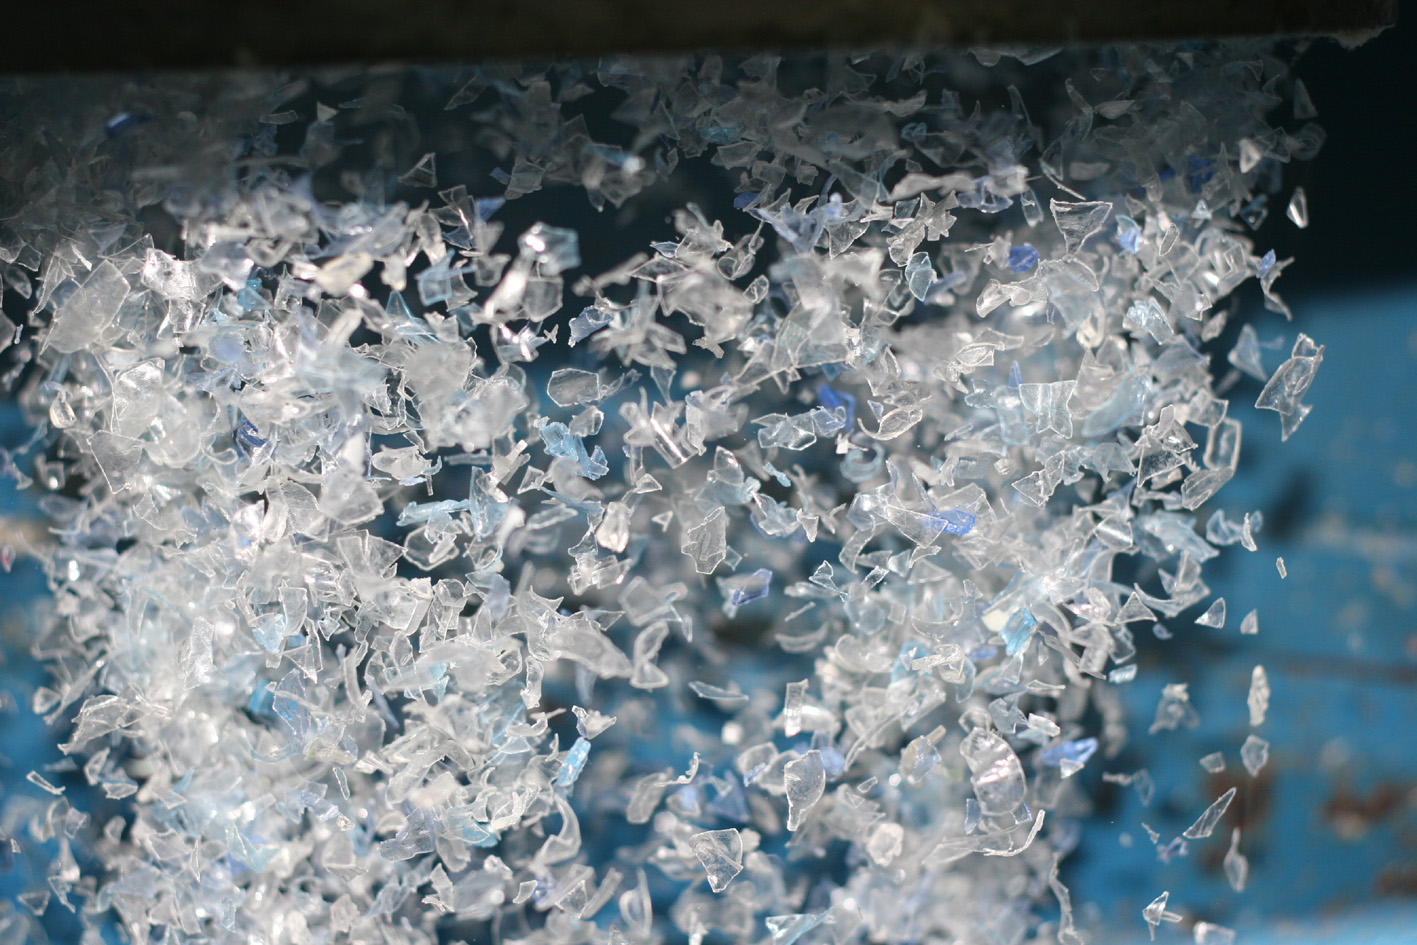 UCY can currently produce 40,000 tons of recycled PET flake per year. © IVL